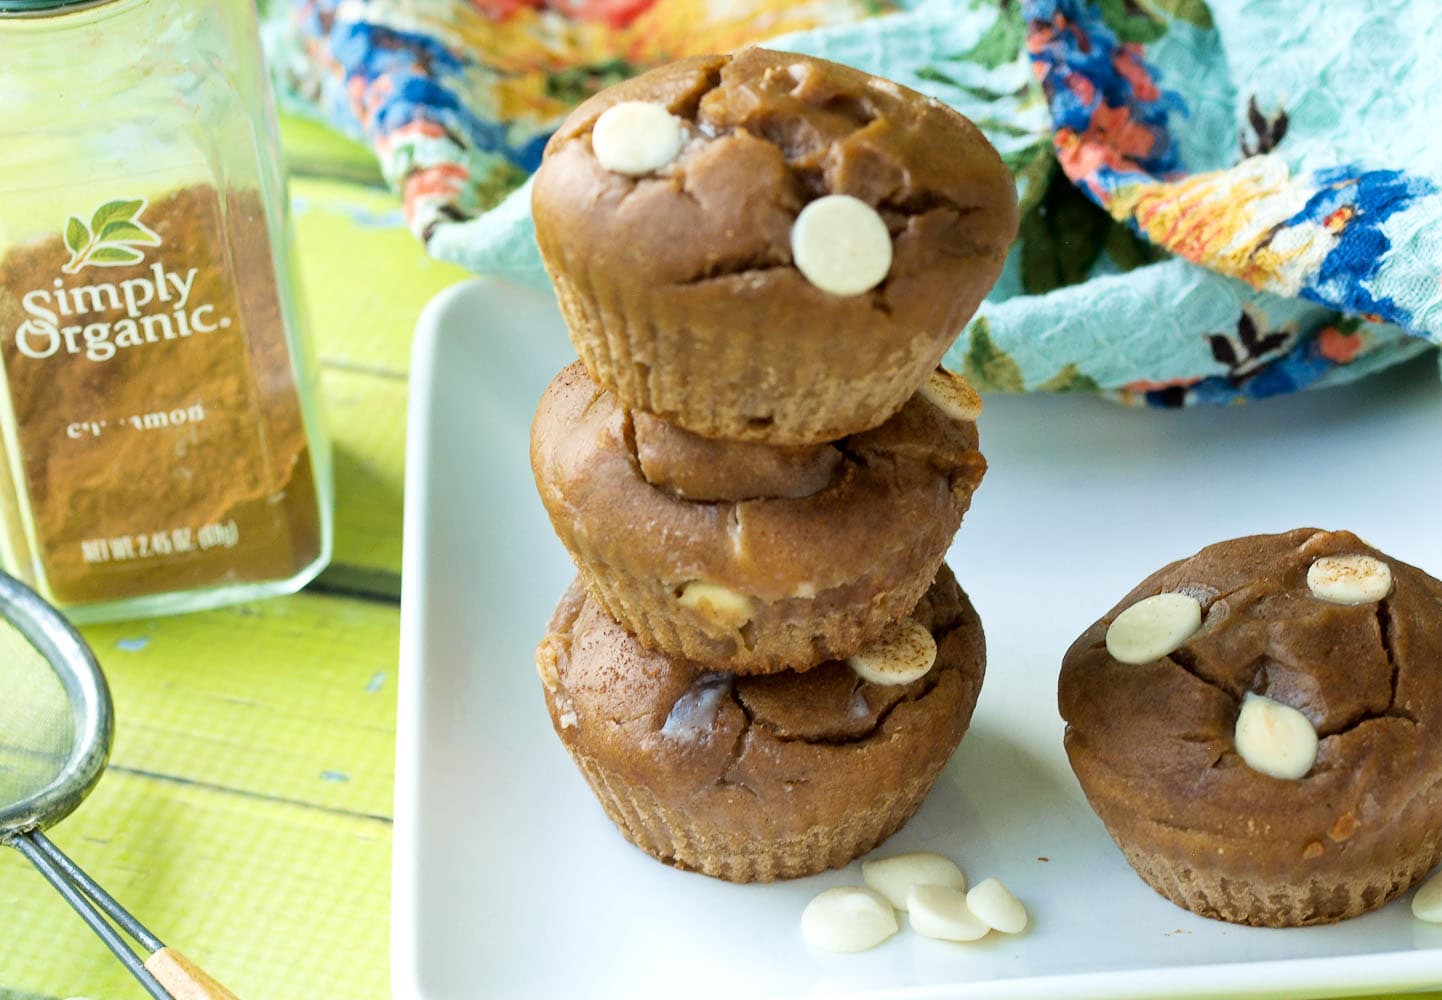 Flourless Cinnamon White Chocolate Chip Blender Muffin recipe. You can prep these easy and healthy muffins in 5 minutes! Great portable breakfast option.